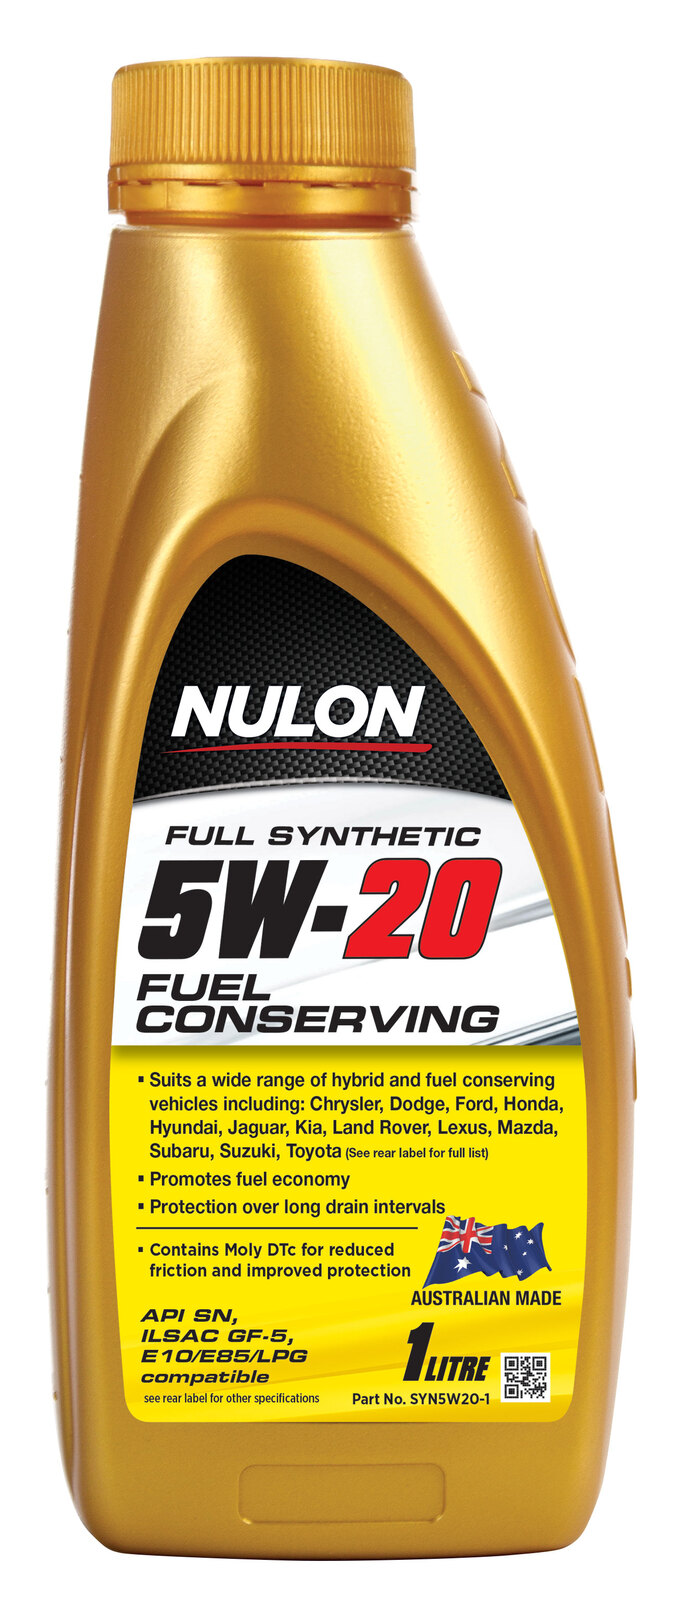 NULON Full Synthetic High Strength 5W20 Engine Oil 1L, Each